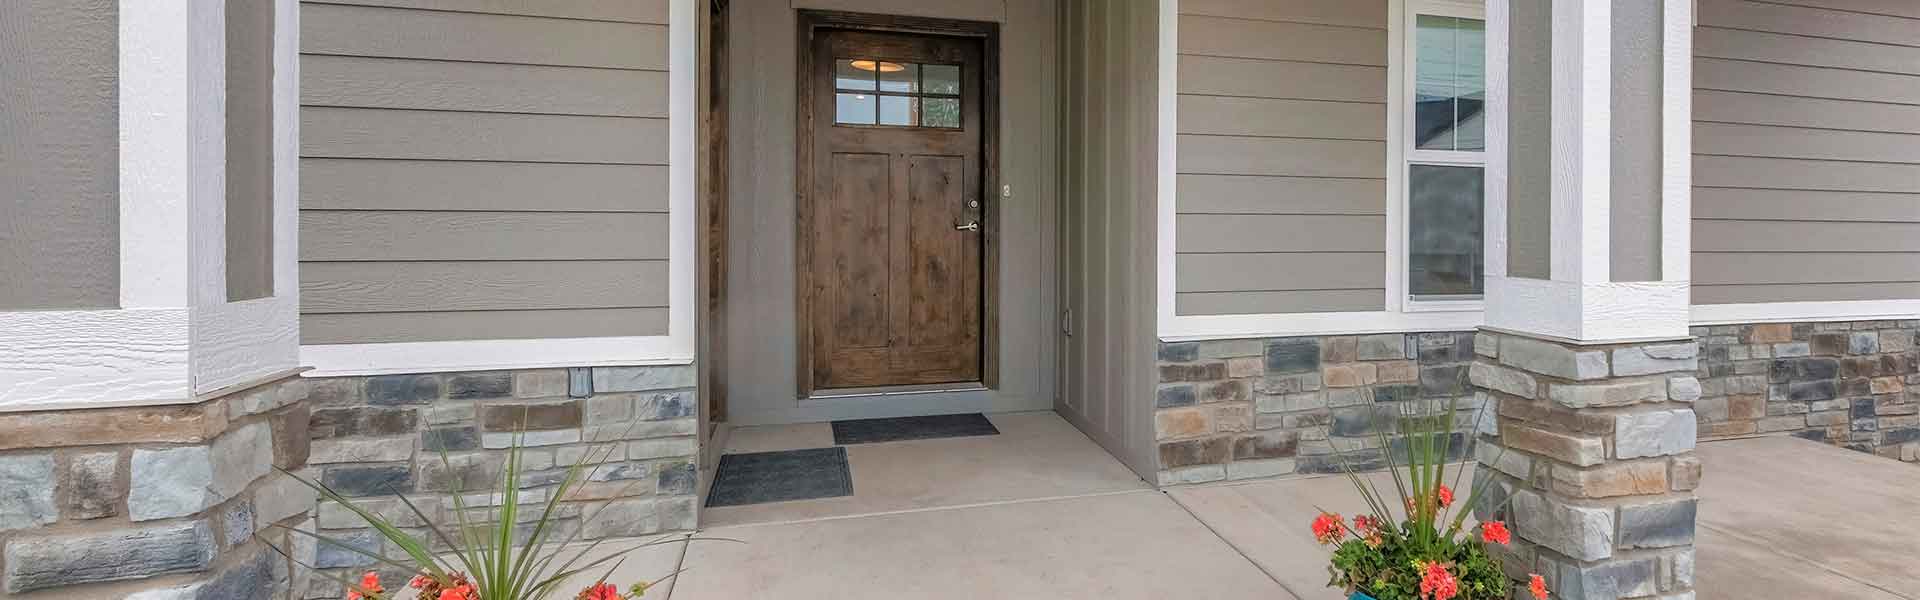 House entry way